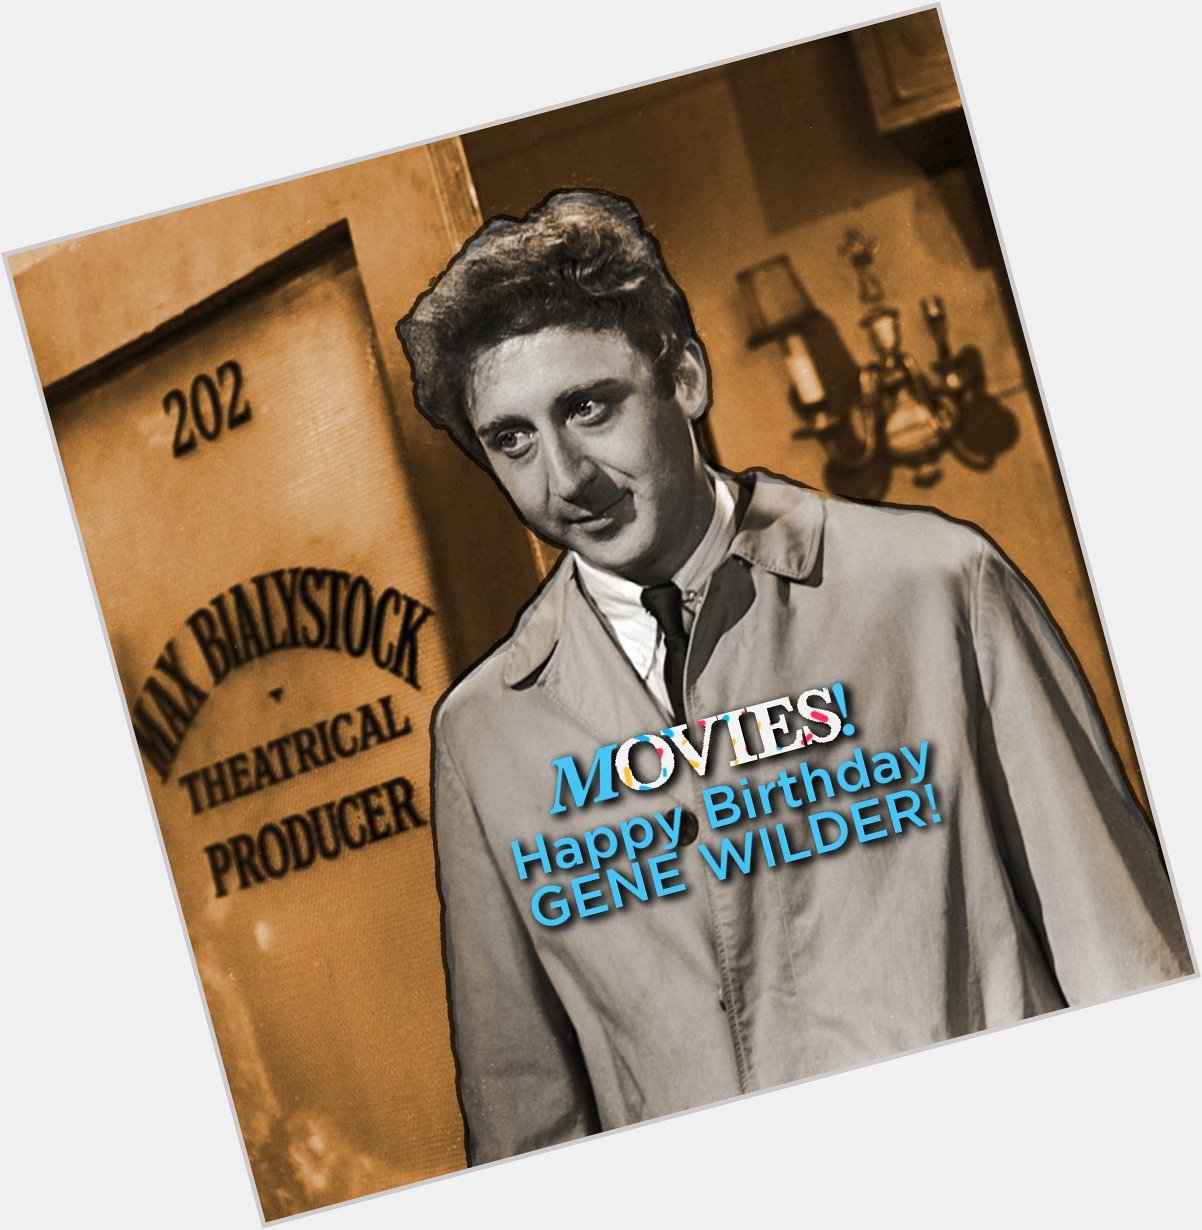 Happy Birthday Gene Wilder!

Know what film this is from? 

(Pst, the background gives it away.) 